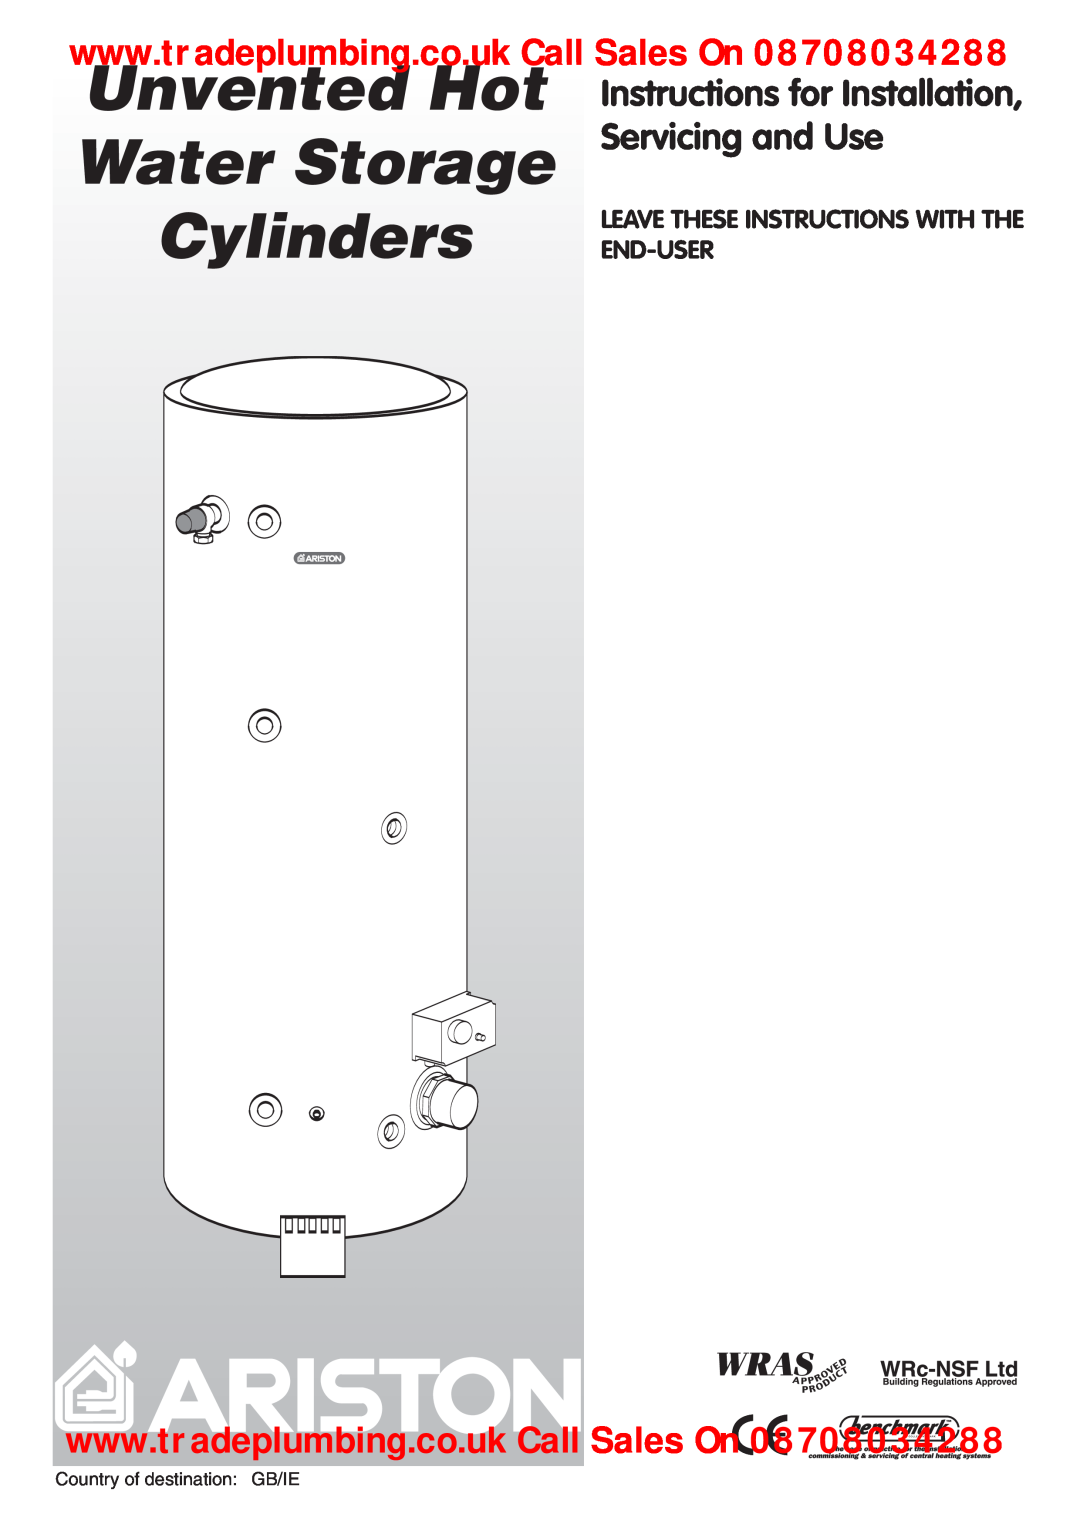 Ariston Unvented Hot Water Storage Cylinders manual Instructions for Installation, Servicing and Use 